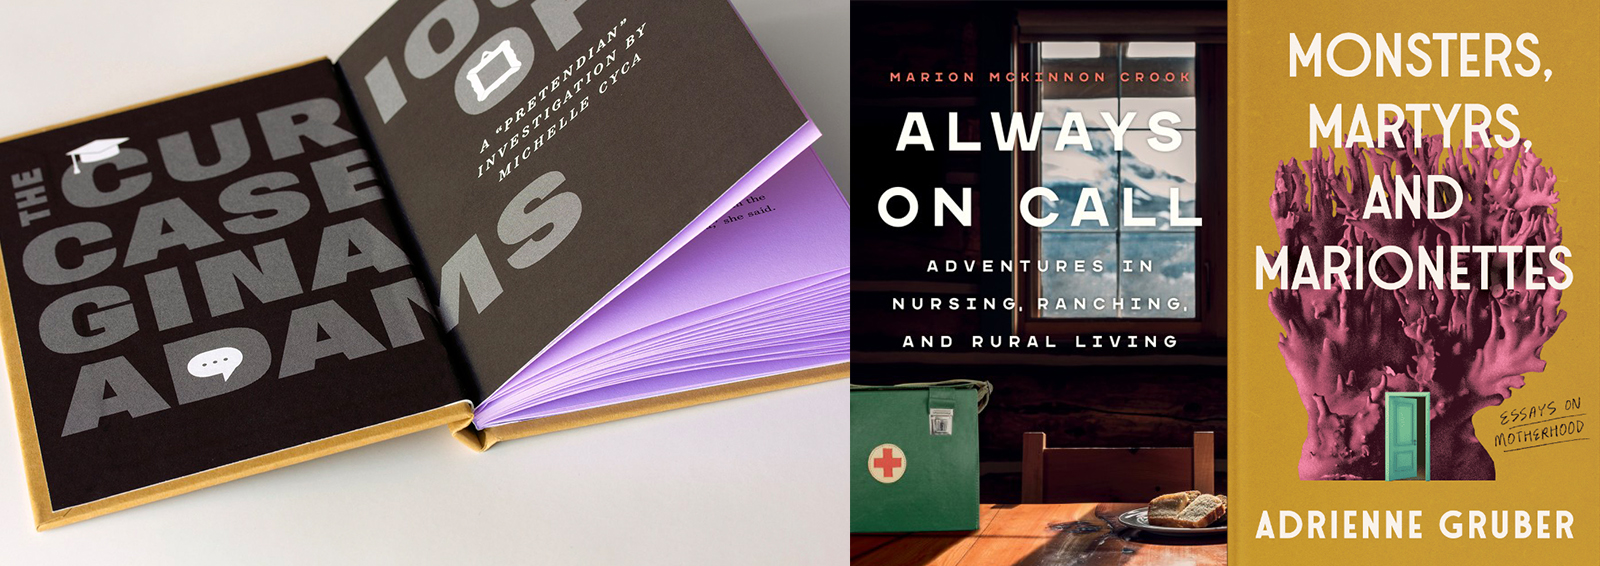 Three book covers, from left: 'The Curious Case of Gina Adams' by Michelle Cyca; 'Always on Call' by Marion McKinnon Crook; 'Monsters, Martyrs and Marionettes' by Adrienne Gruber.